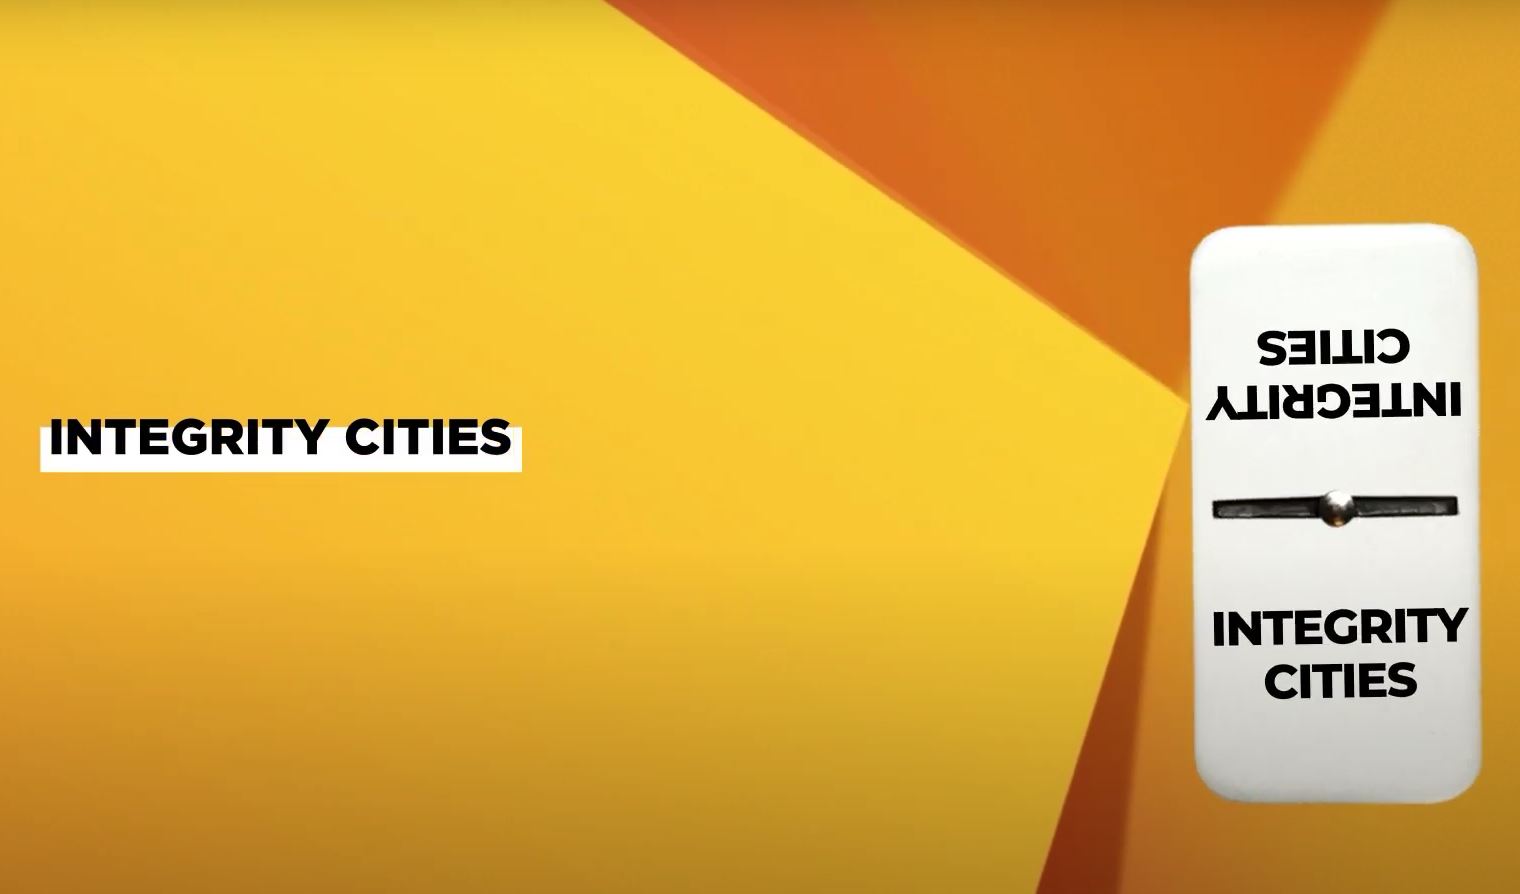 Integrity Cities:  interim results of cooperation with the EU Anti-Corruption Initiative (Video)